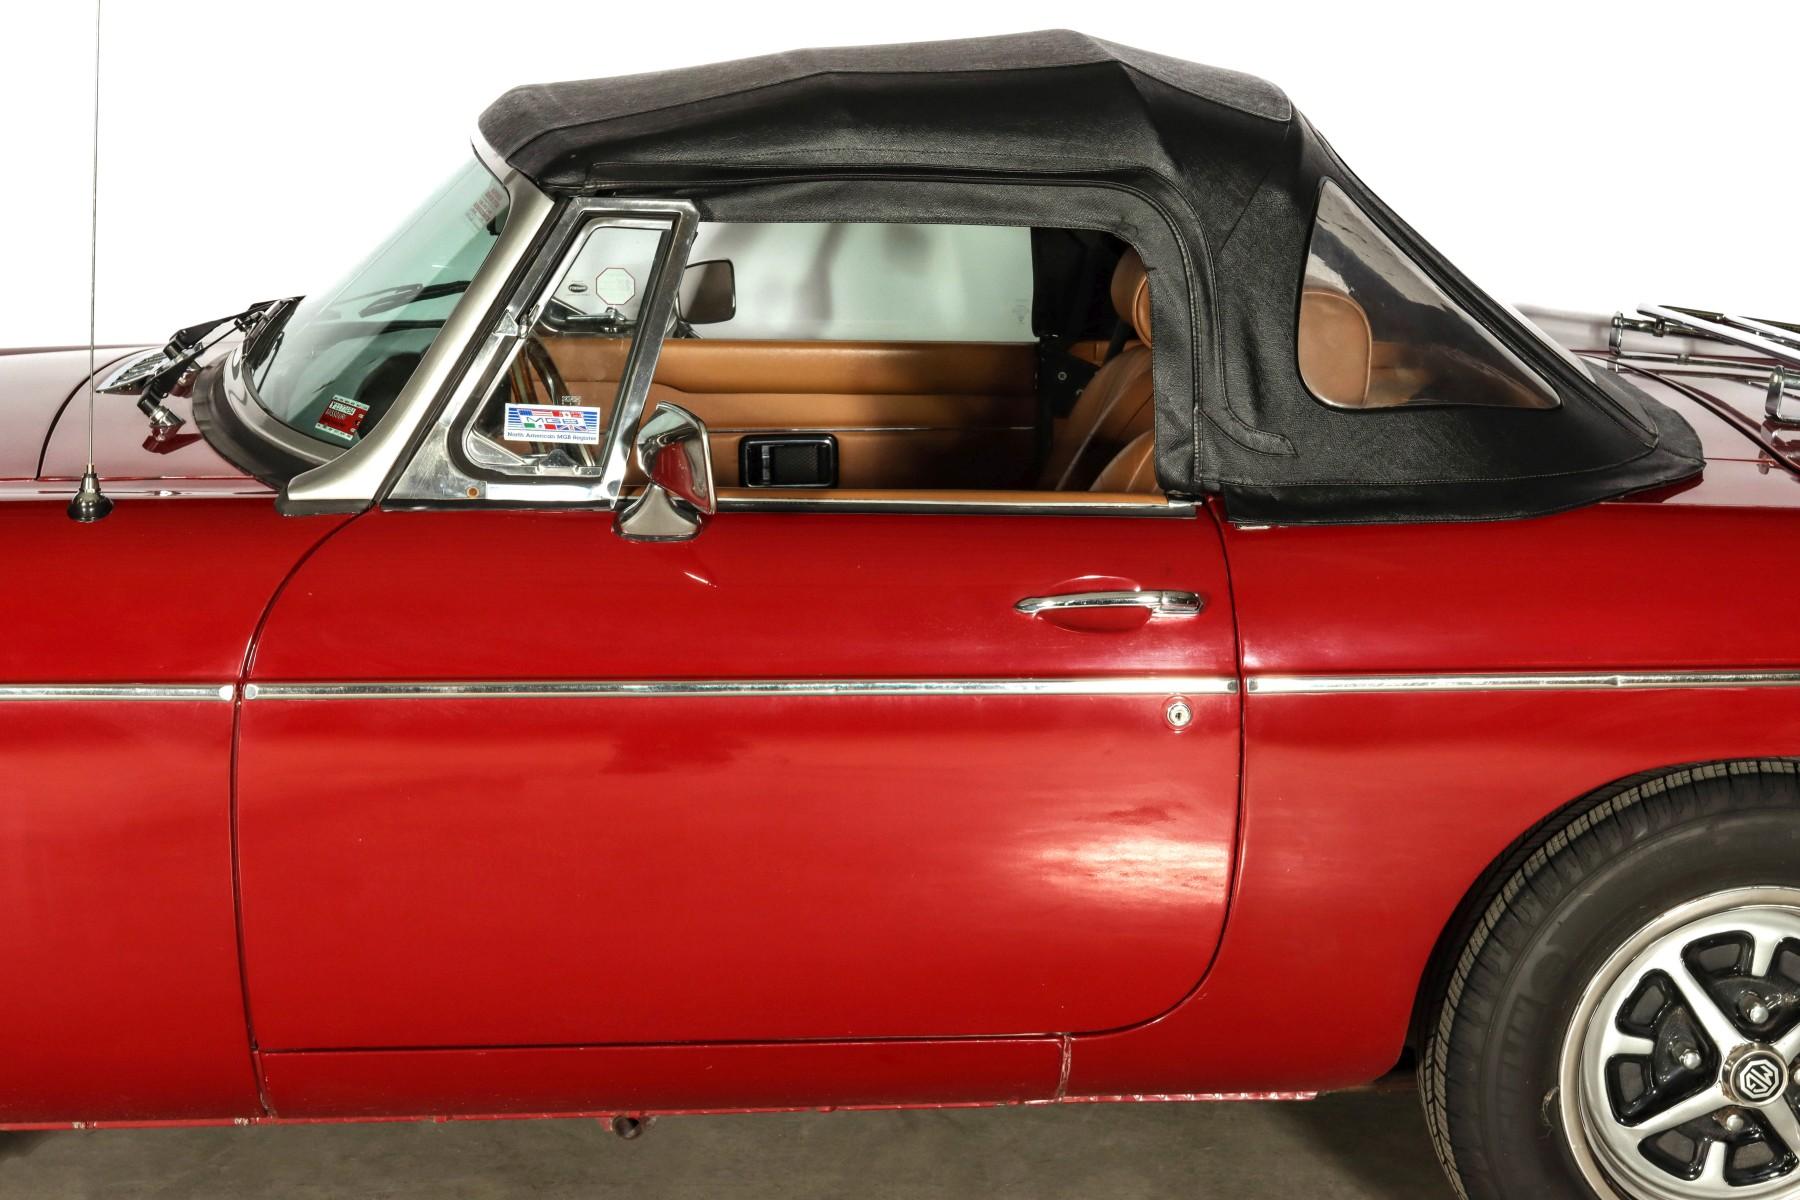 A 1980 MG CONVERTIBLE MODEL B WITH RARE SUPERCHARGER